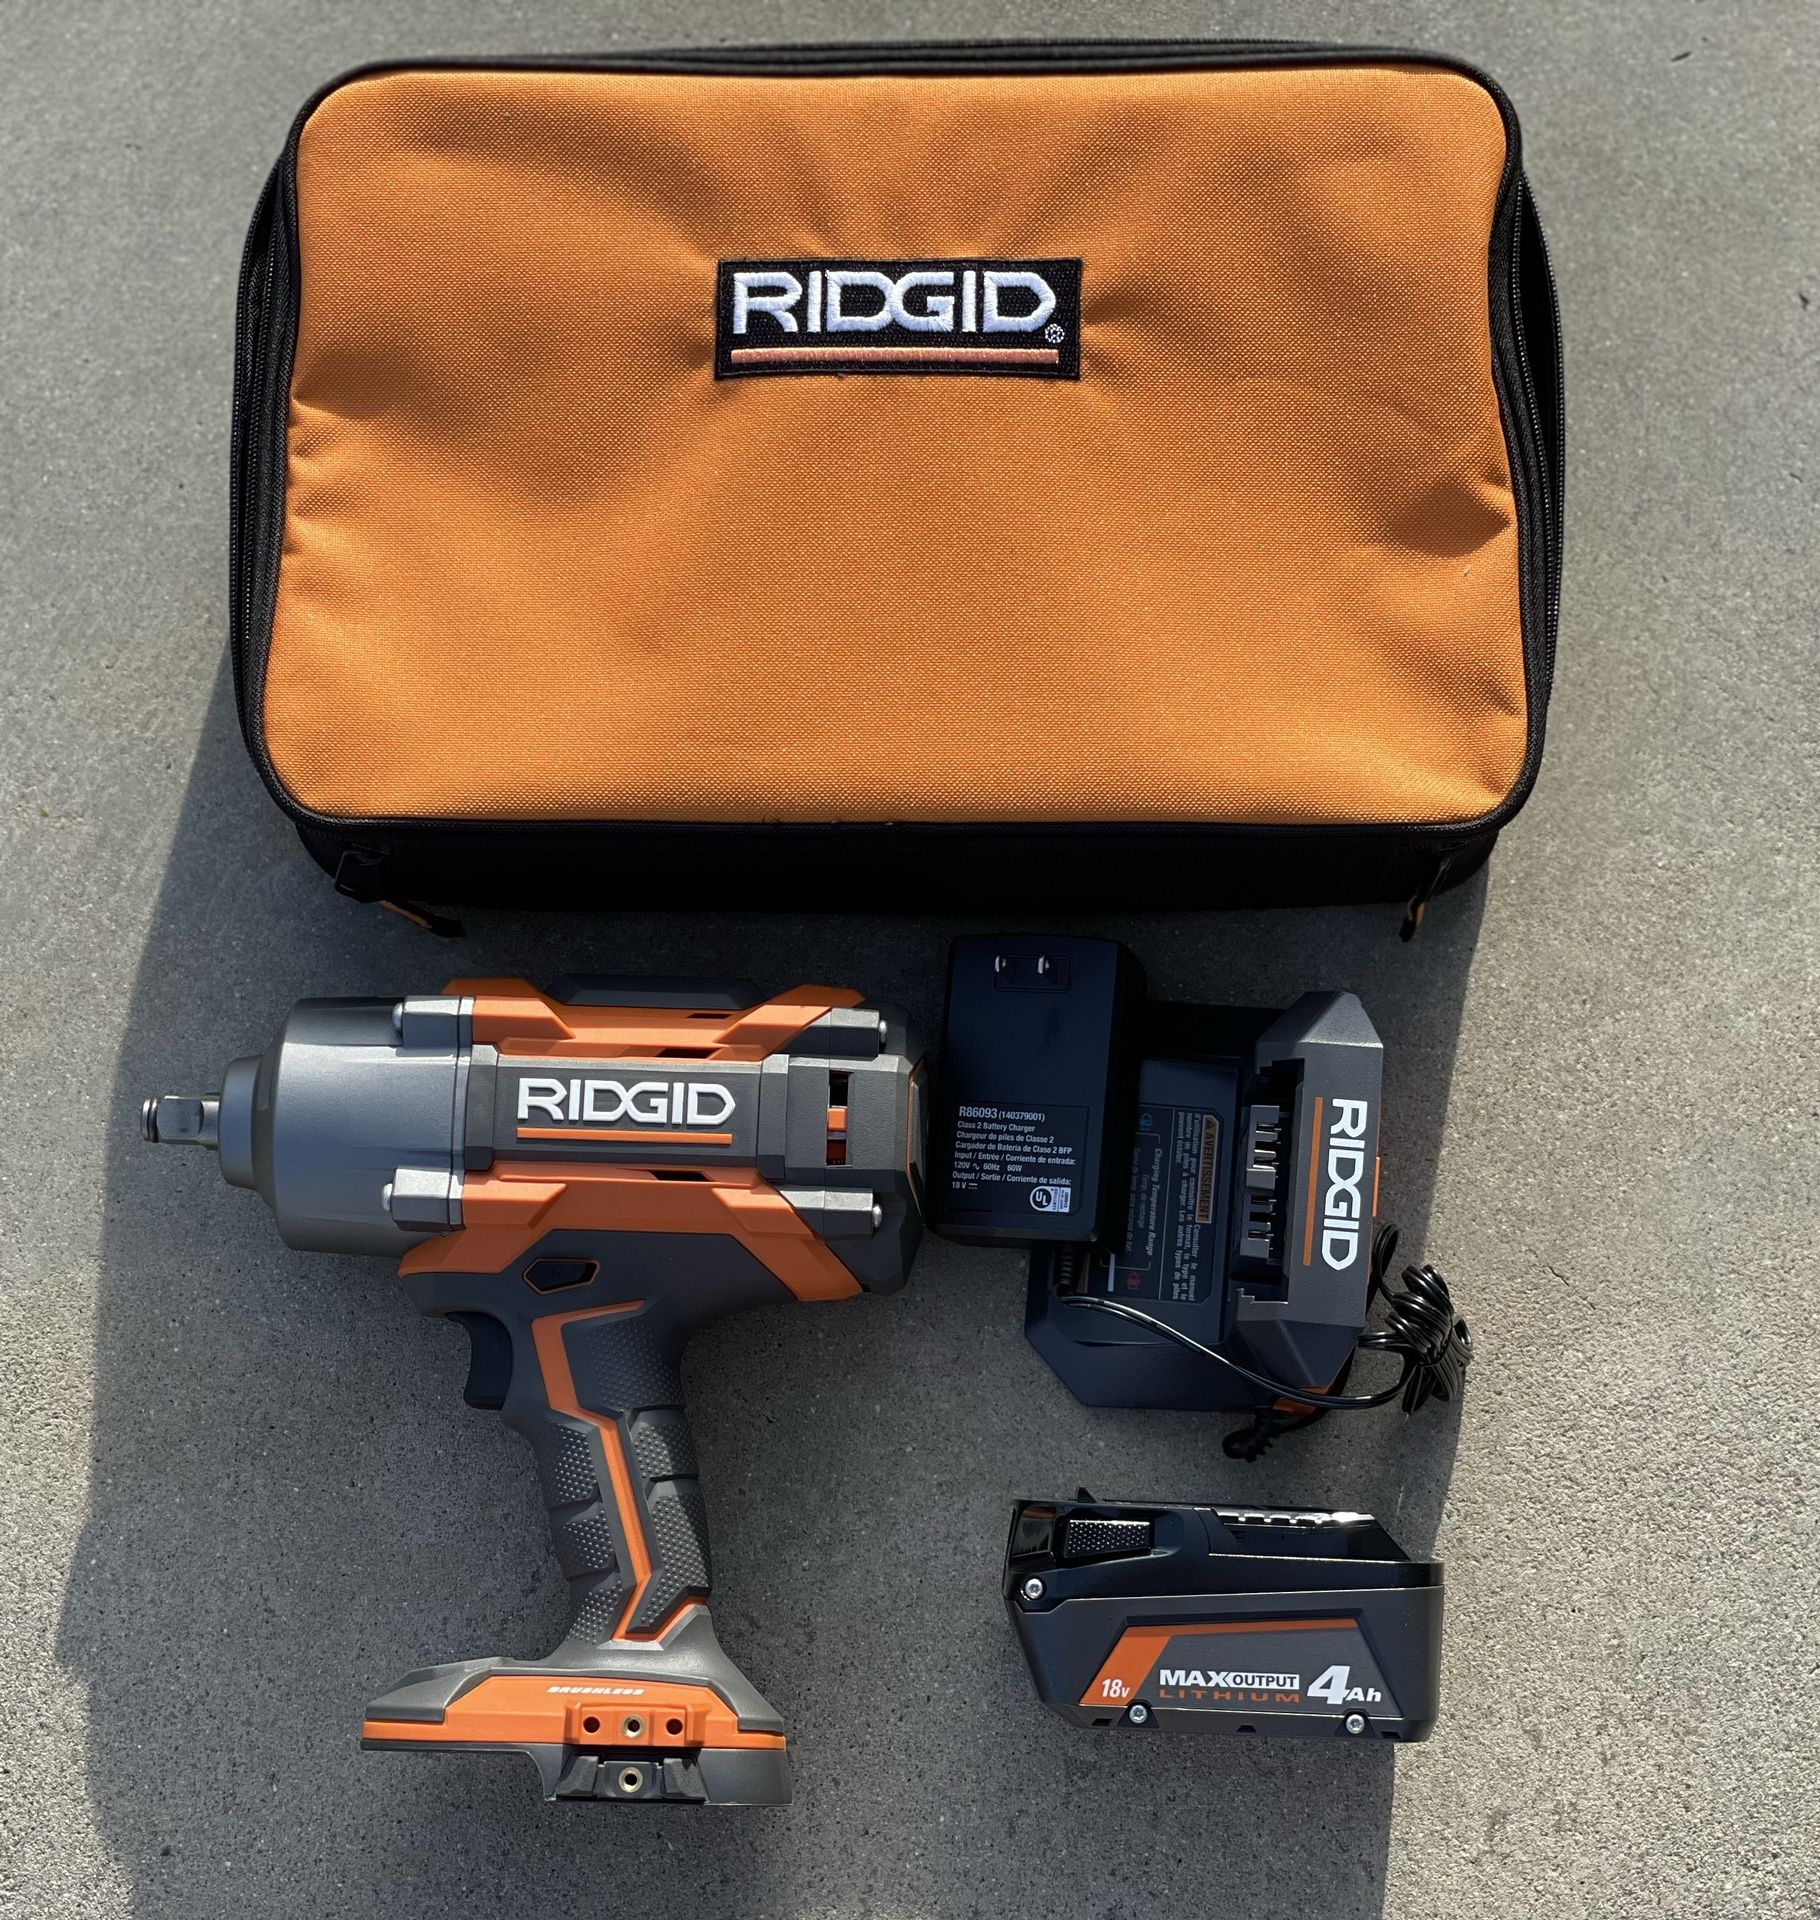 RIDGID 1/2 in. High Torque Impact Wrench Kit 4.0 Ah Battery and Charger